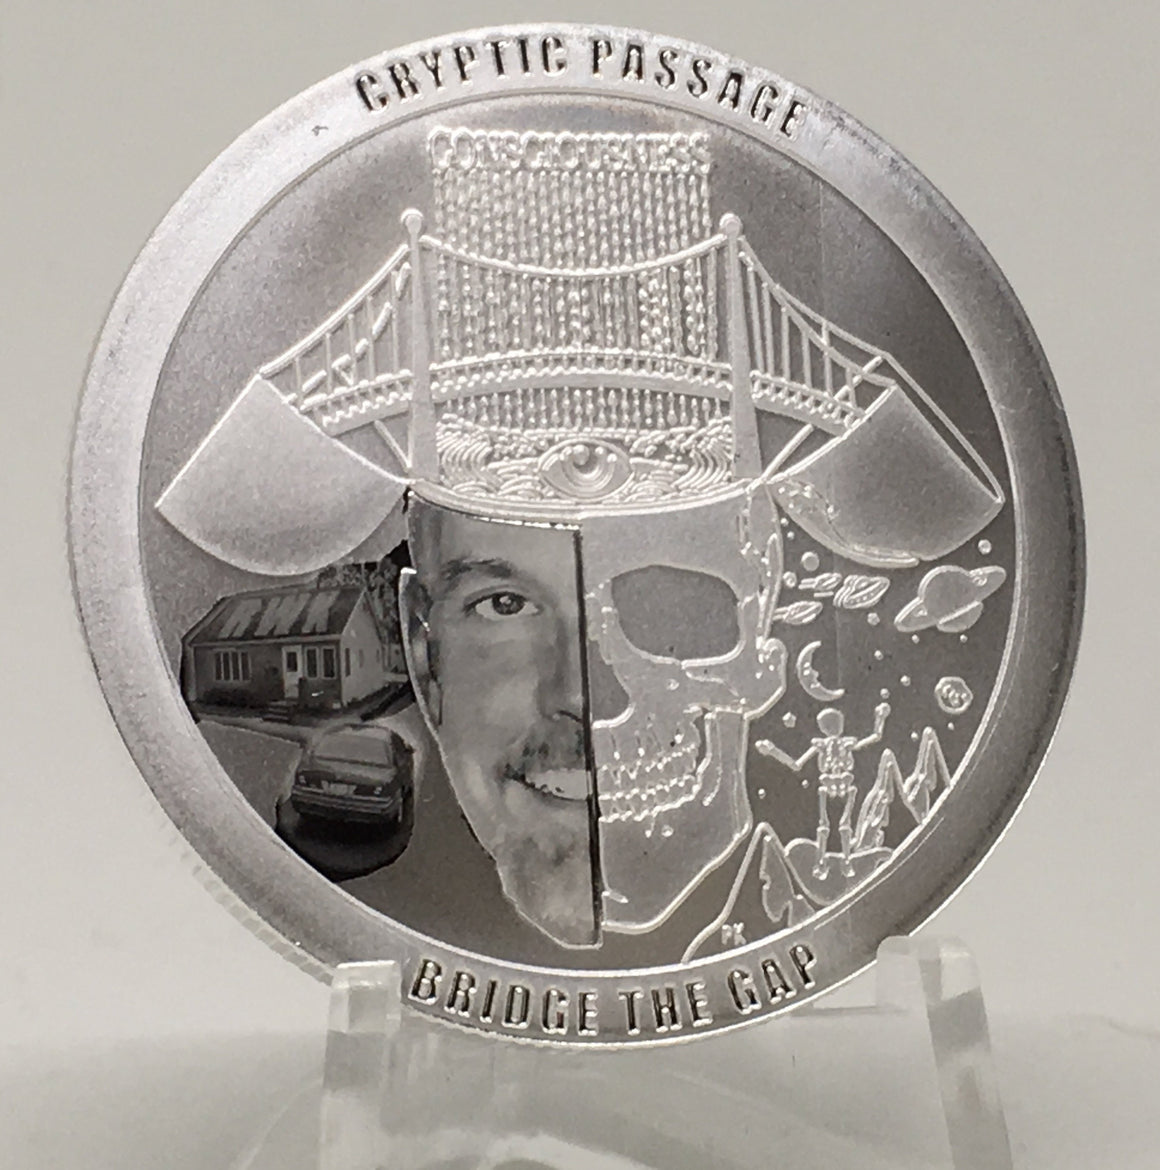 Cryptic Silver Series #2-Cryptic Passage, BU Finish by Chautauqua Silver Works, 1oz .999 Silver Round.